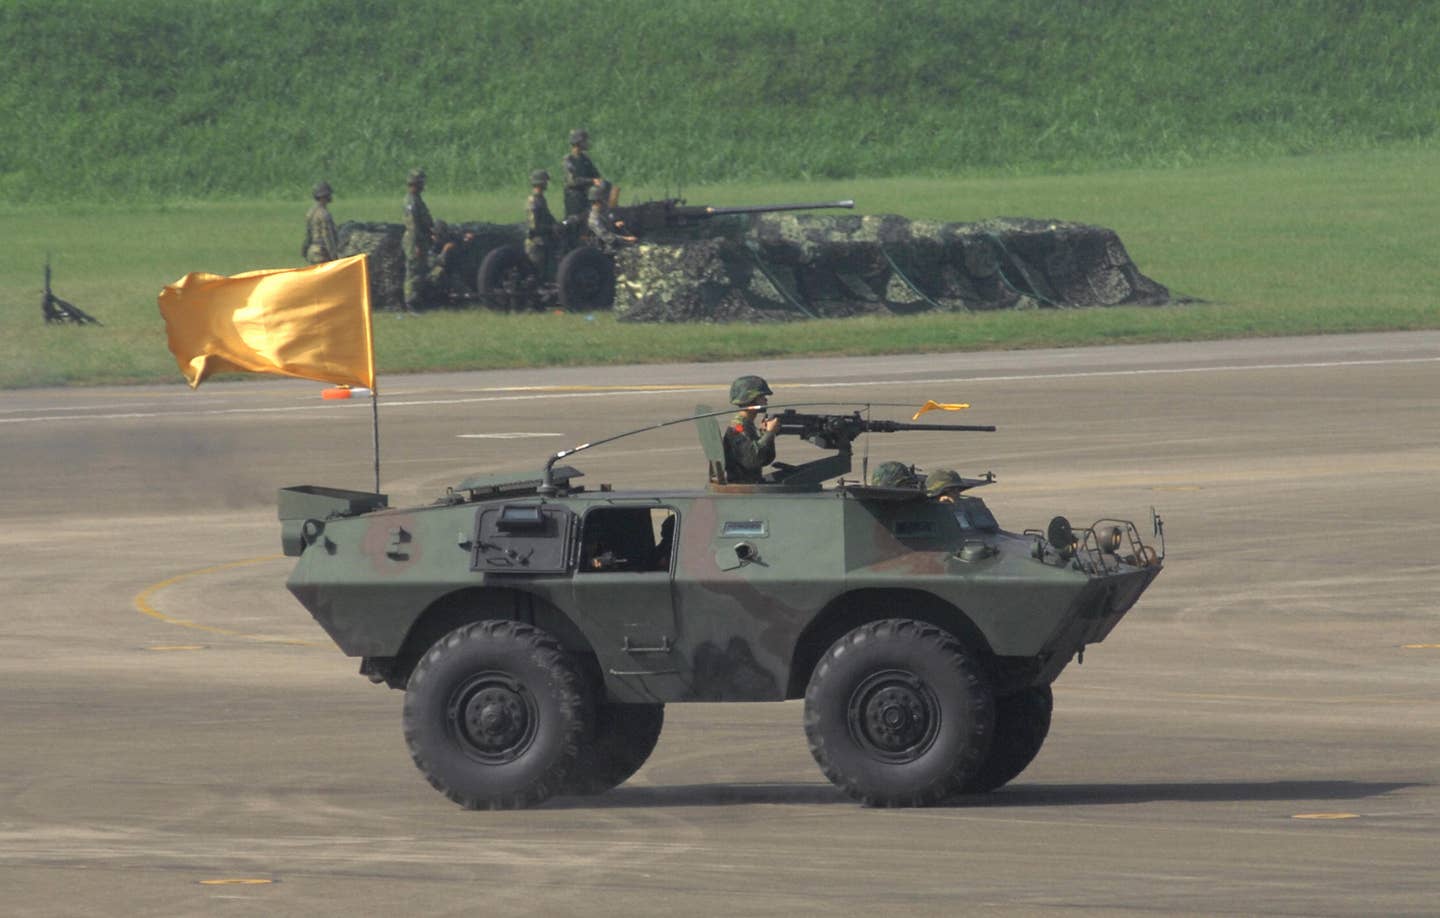 An armored vehicle during a drill at Ching Chuan Kang Air Base in Taichung, central Taiwan, on September 23, 2008, simulating an air attack from China. <em>PATRICK LIN/AFP via Getty Images</em>